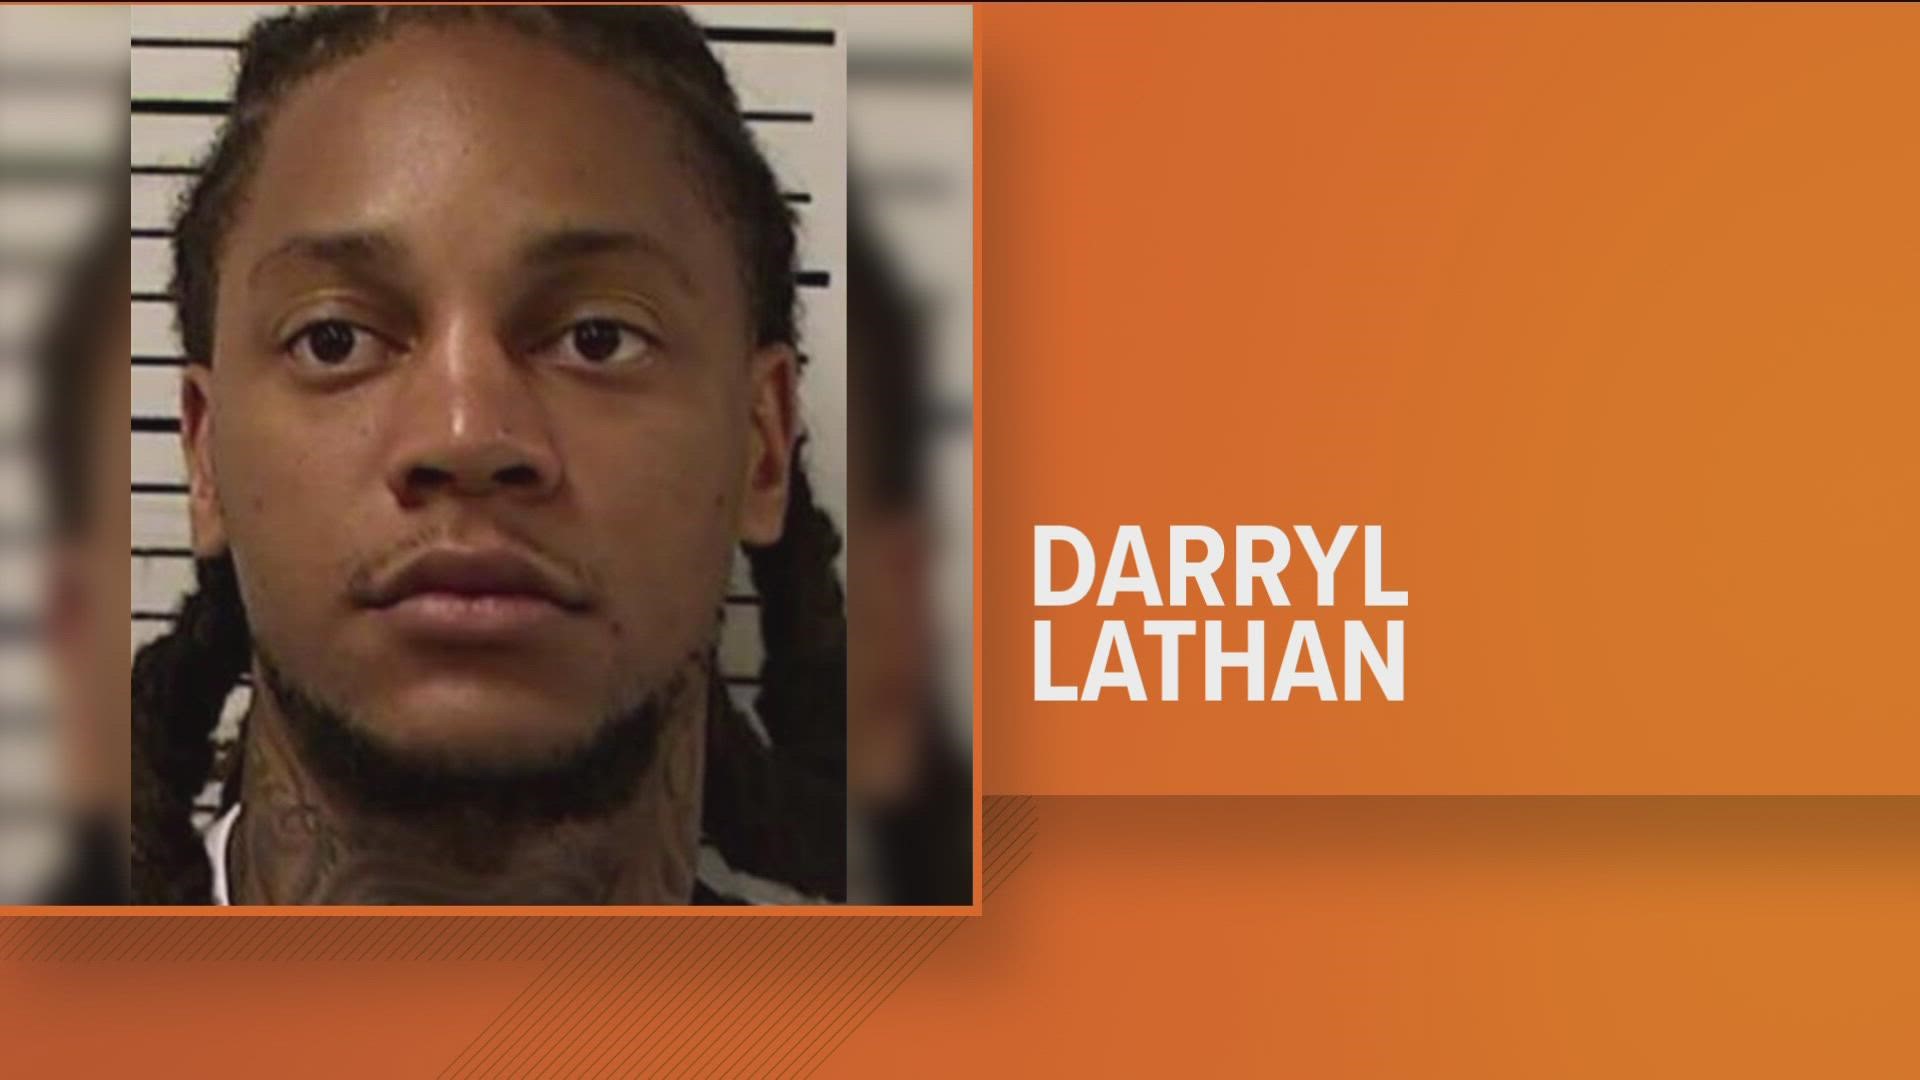 Darryl Lathan was sentenced to 20.5 years in prison Thursday for the 2021 homicide of Amonte Rodgers.